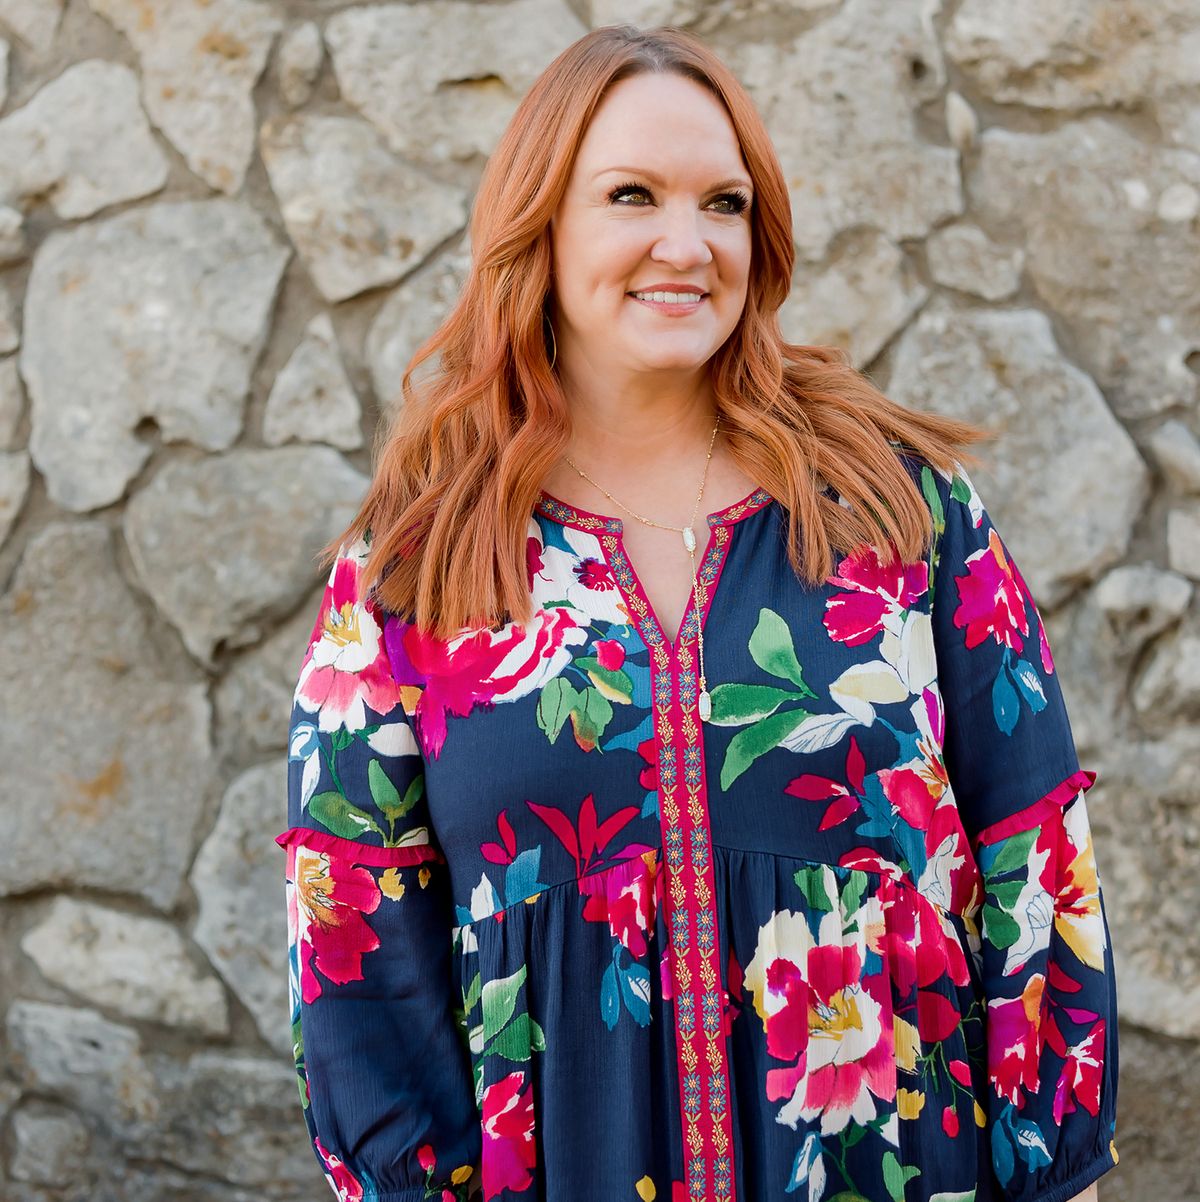 https://hips.hearstapps.com/hmg-prod/images/ree-drummond-blouse-1606756204.jpeg?crop=1.00xw:0.751xh;0,0.0120xh&resize=1200:*